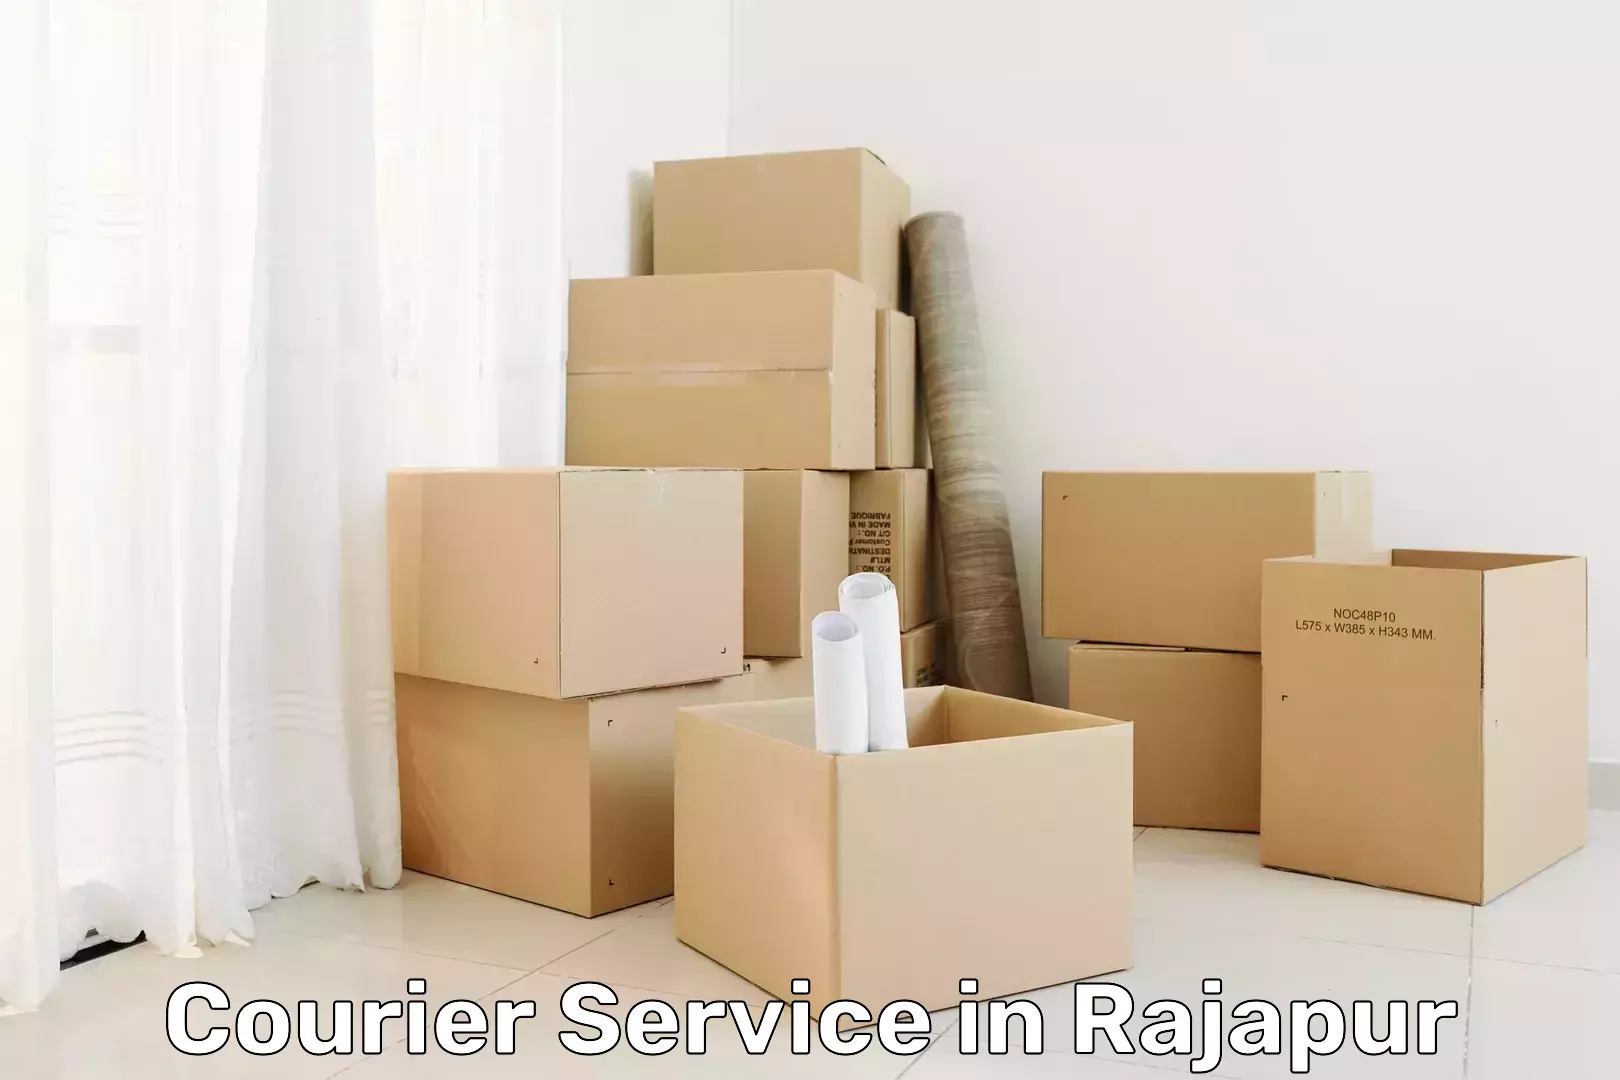 Full-service courier options in Rajapur